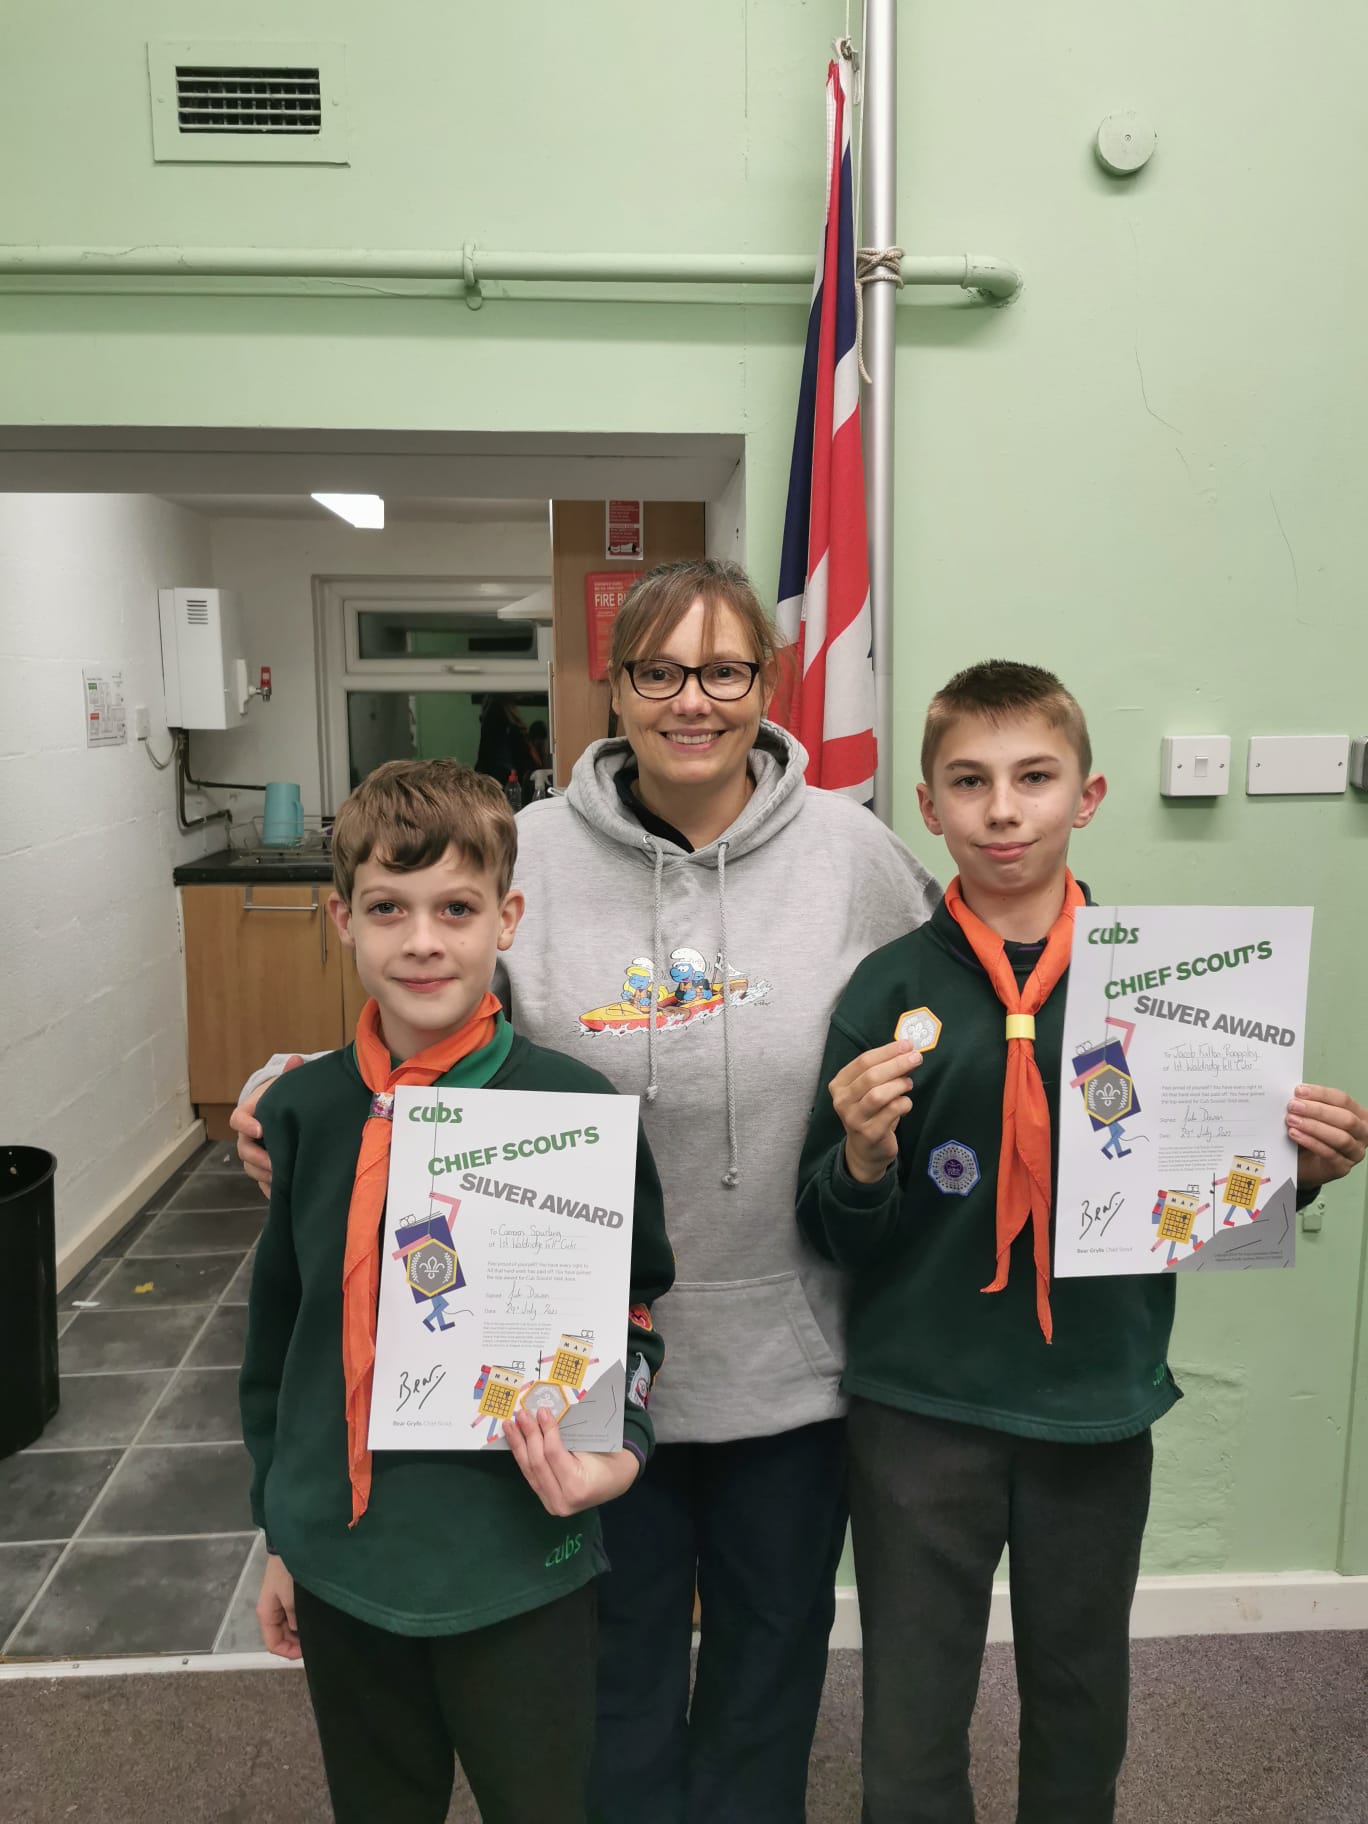 Cubs receiving their Chief Scout's Silver Award